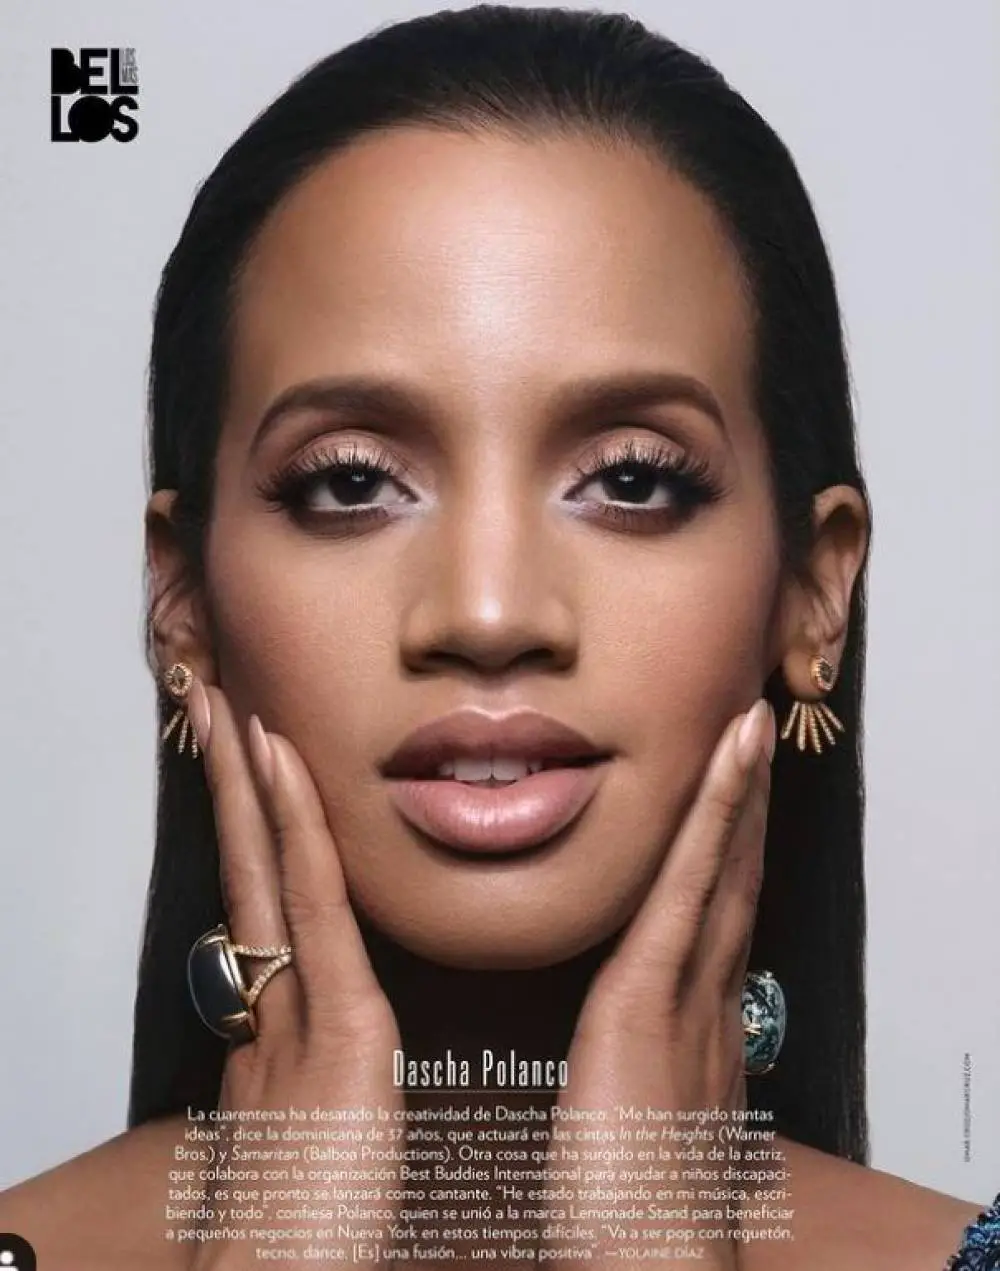 Facts You Did Not Know About Dascha Polanco!